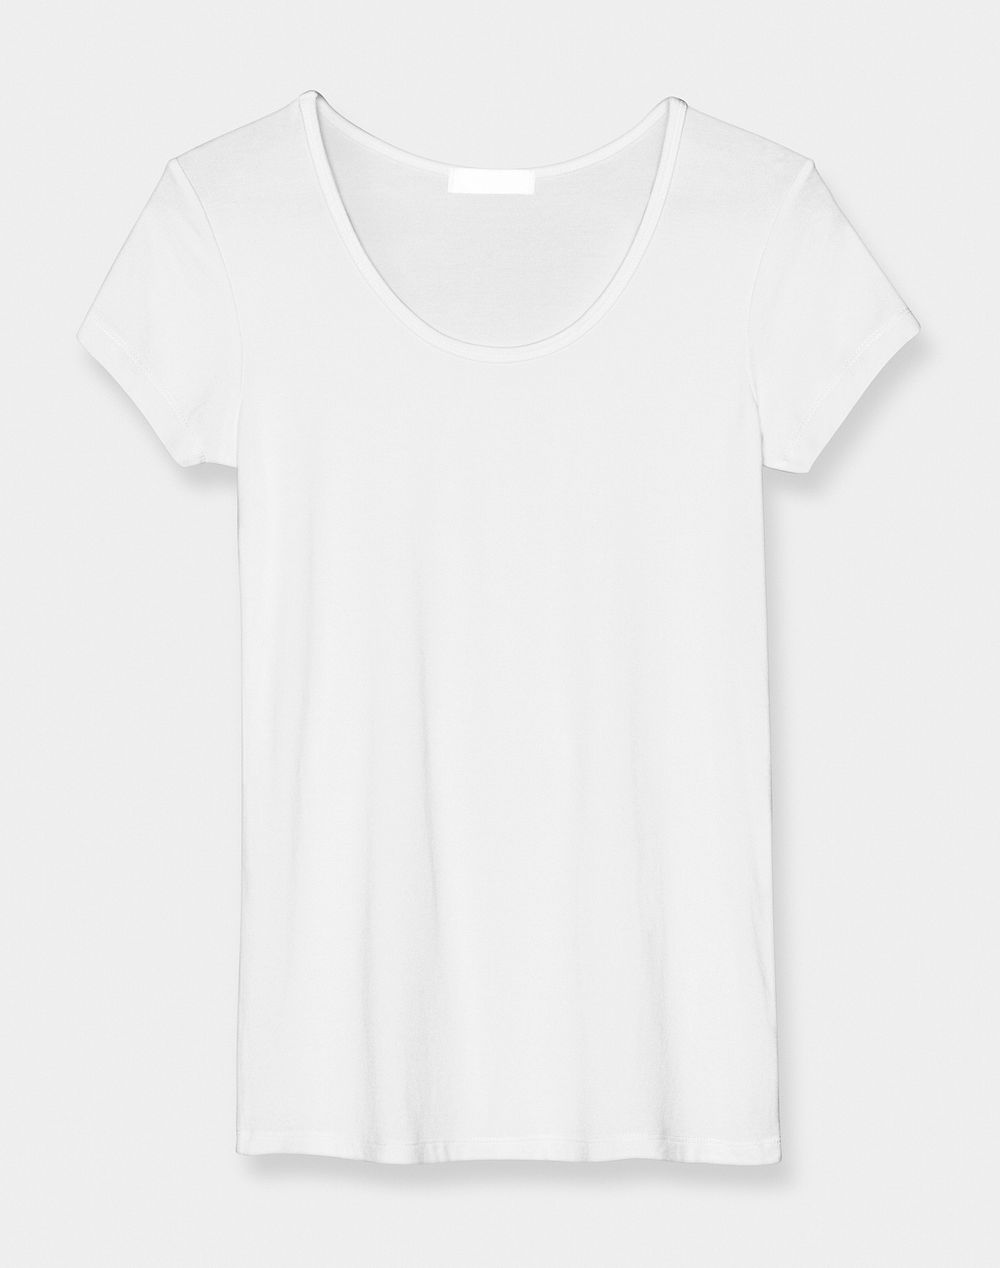 White tee mockup psd women&rsquo;s apparel front view